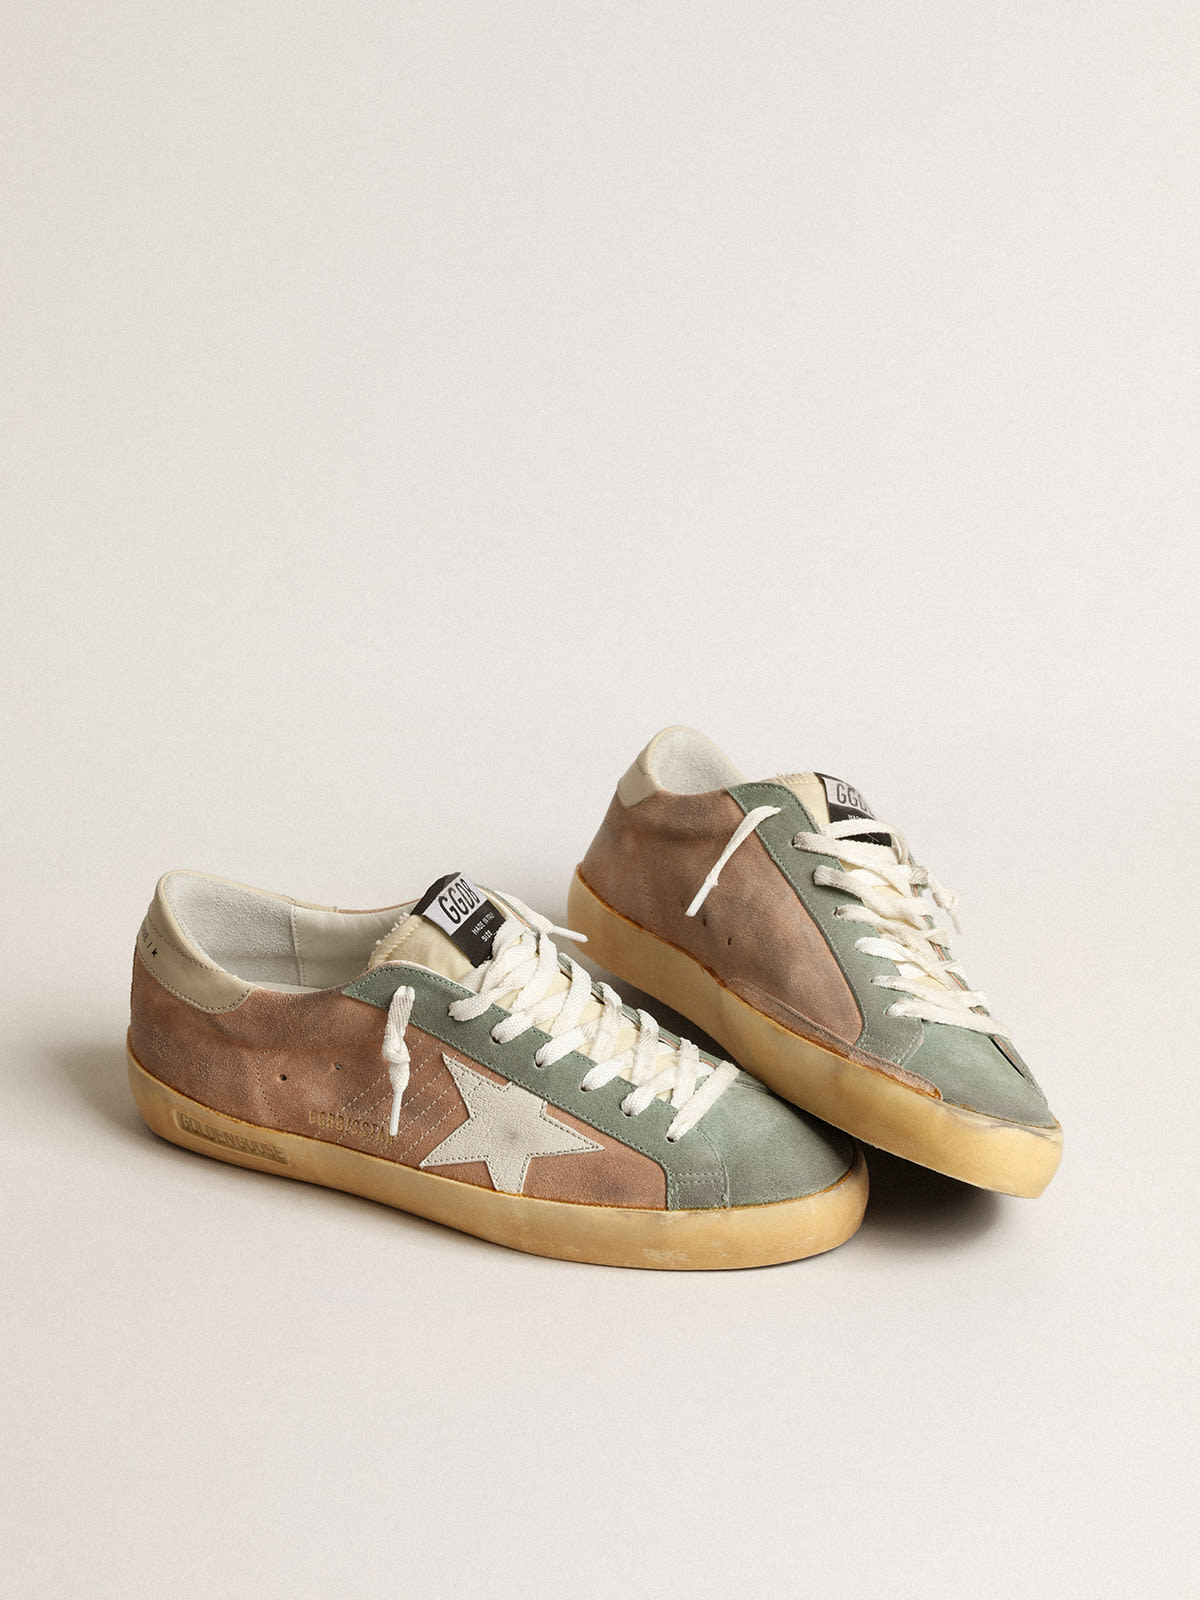 Golden Goose - Super-Star in brown and green suede with white nappa leather star in 